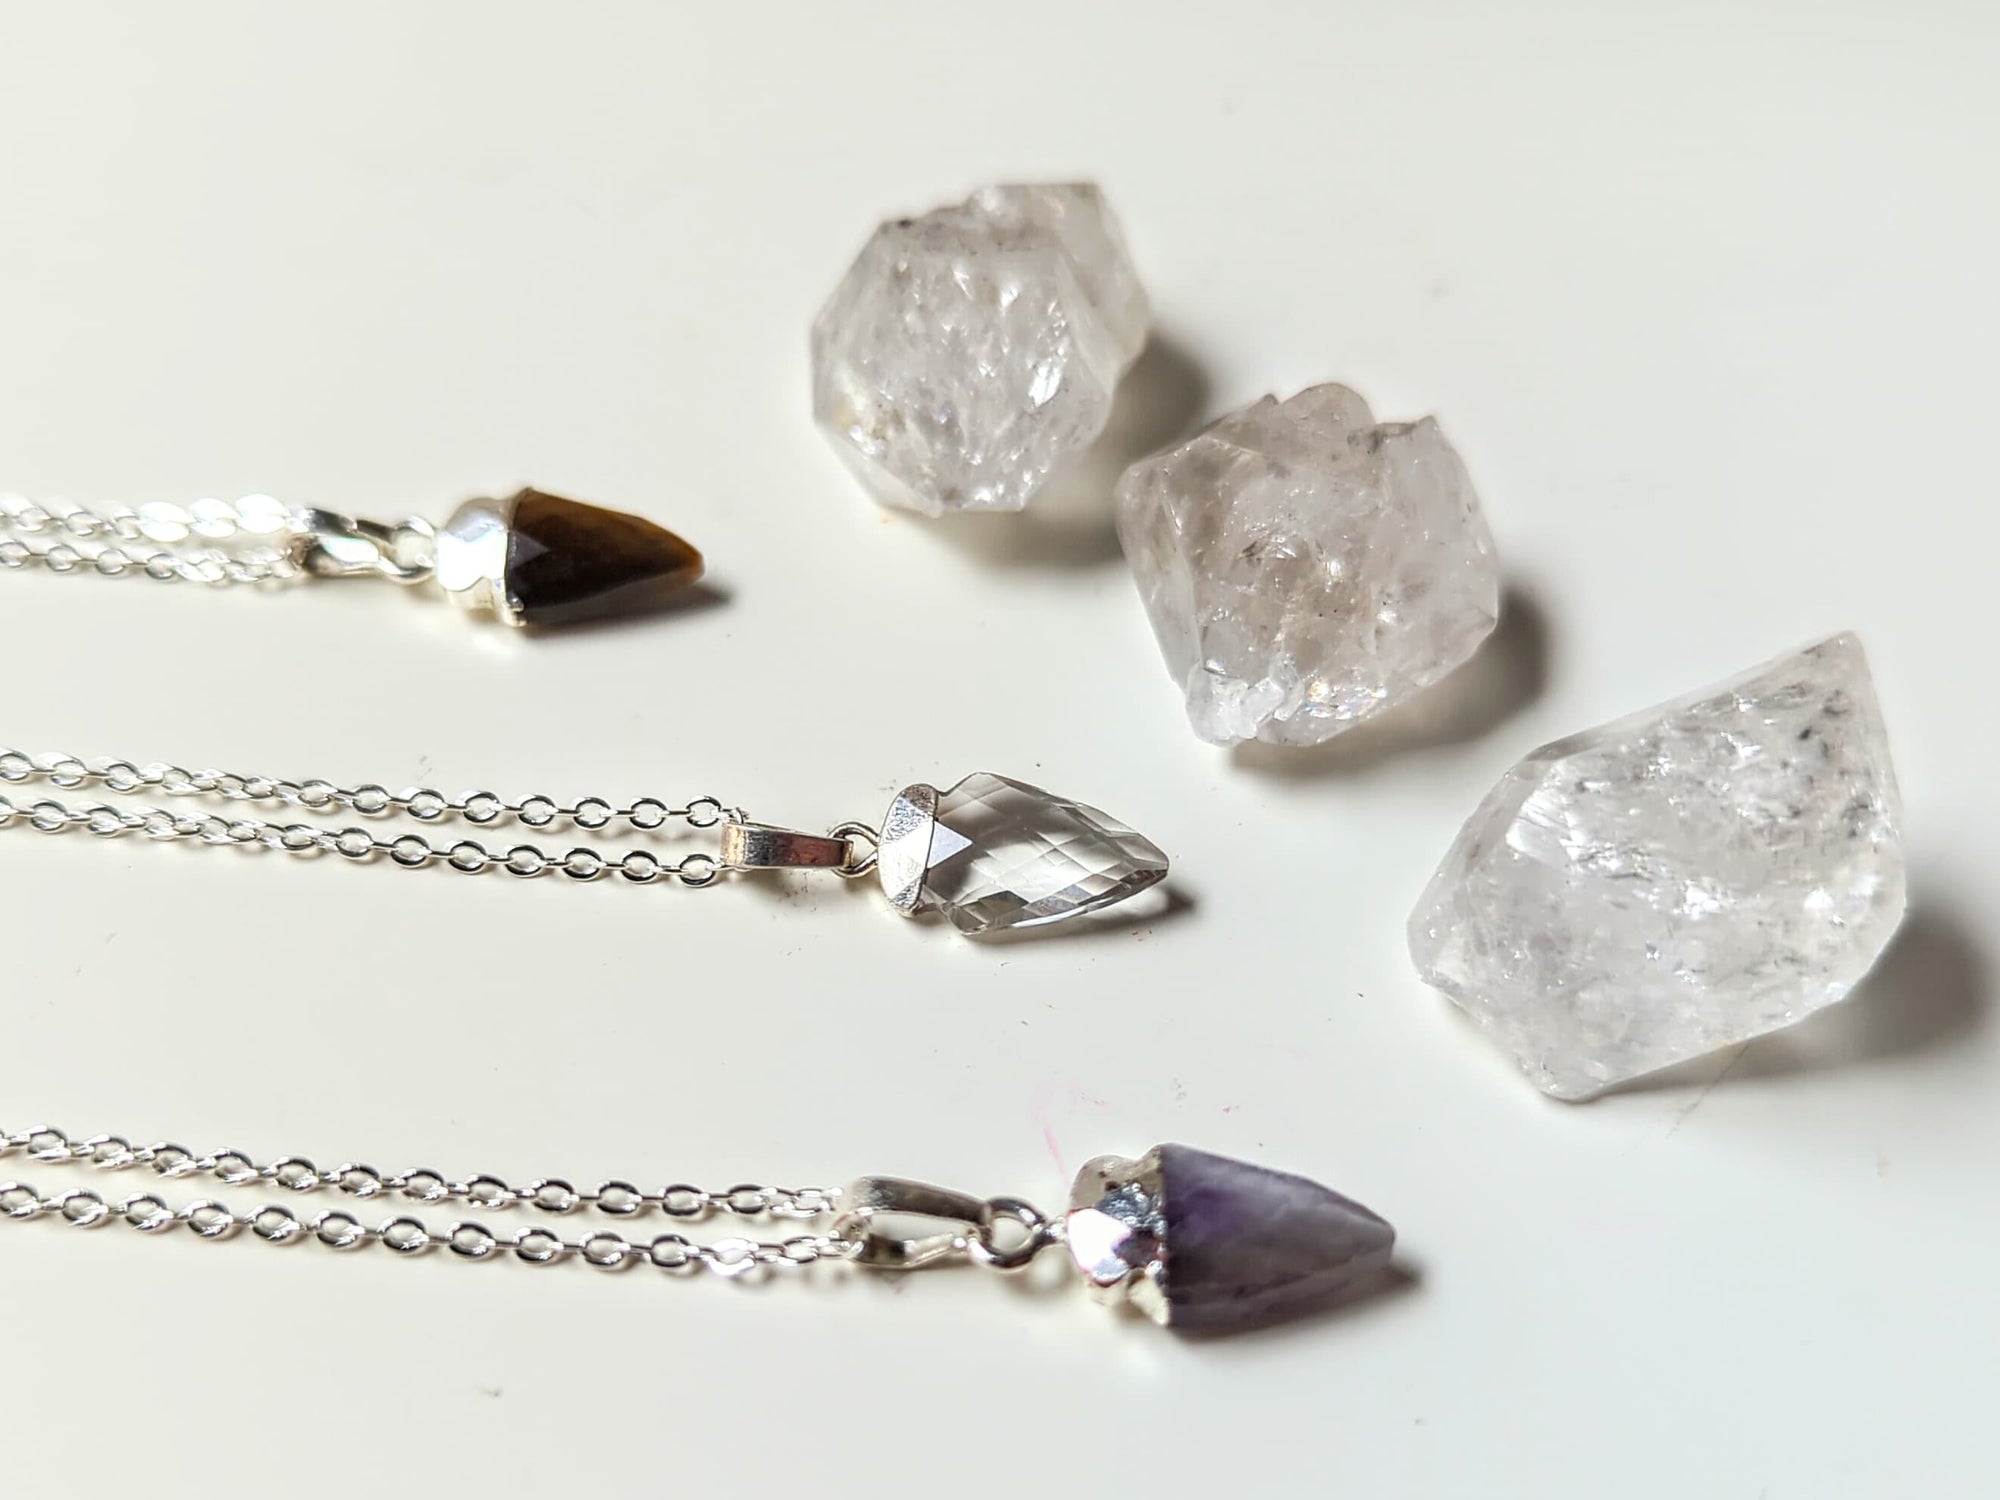 Faceted Arrowhead Silver Necklace - tiger's eye, amethyst, and clear quartz